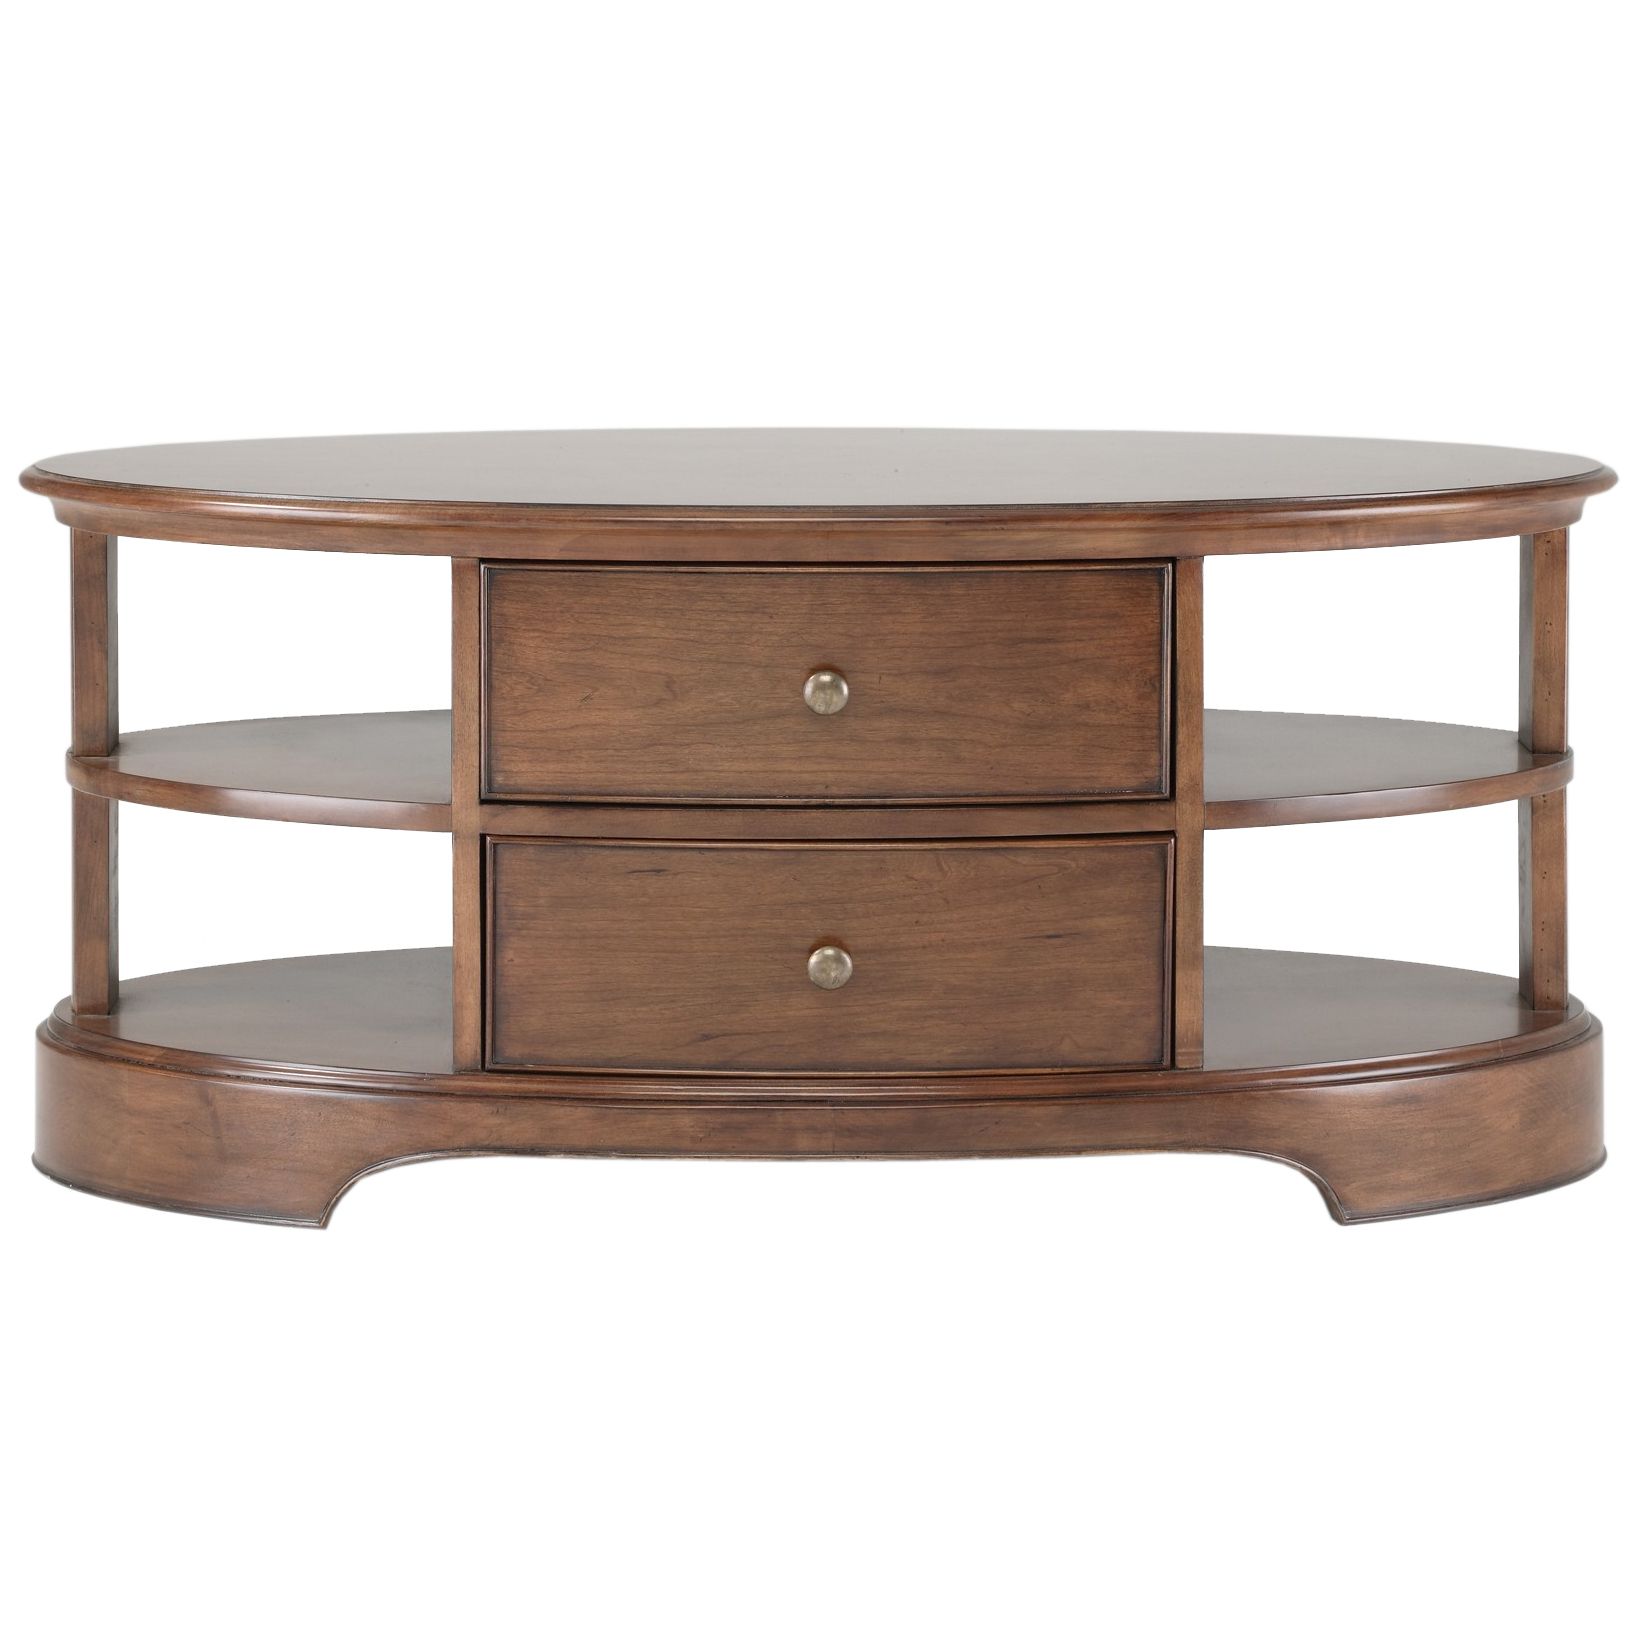 Lille Oval Coffee Table at John Lewis